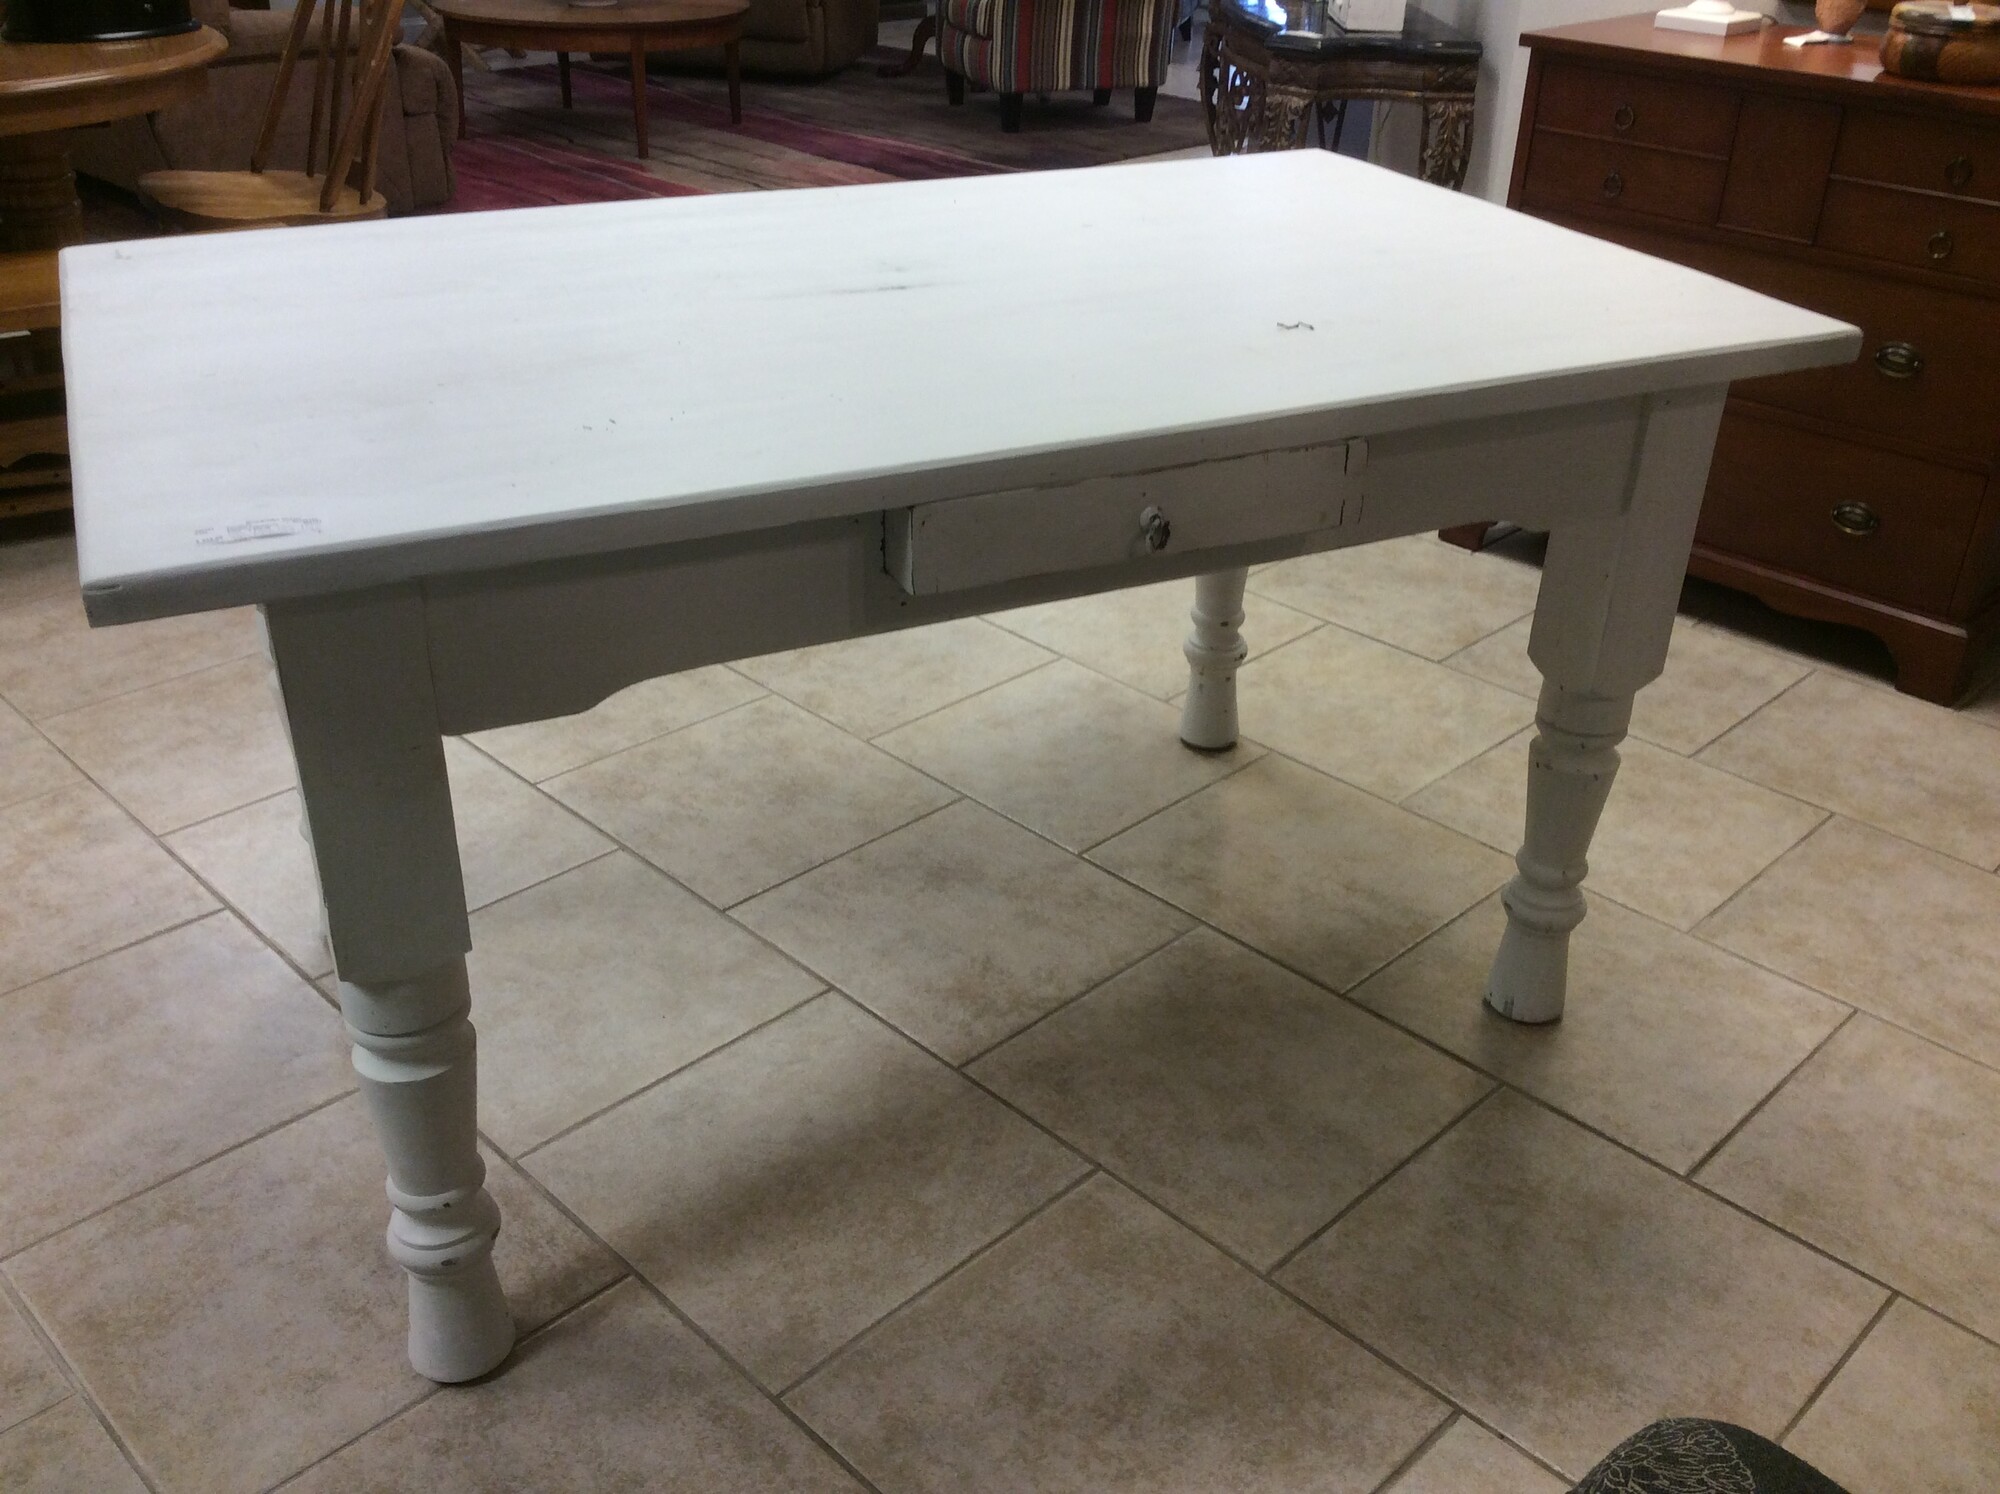 This is a beautiful, hand painted distressed white desk. This desk has one center drawer for office supplies.